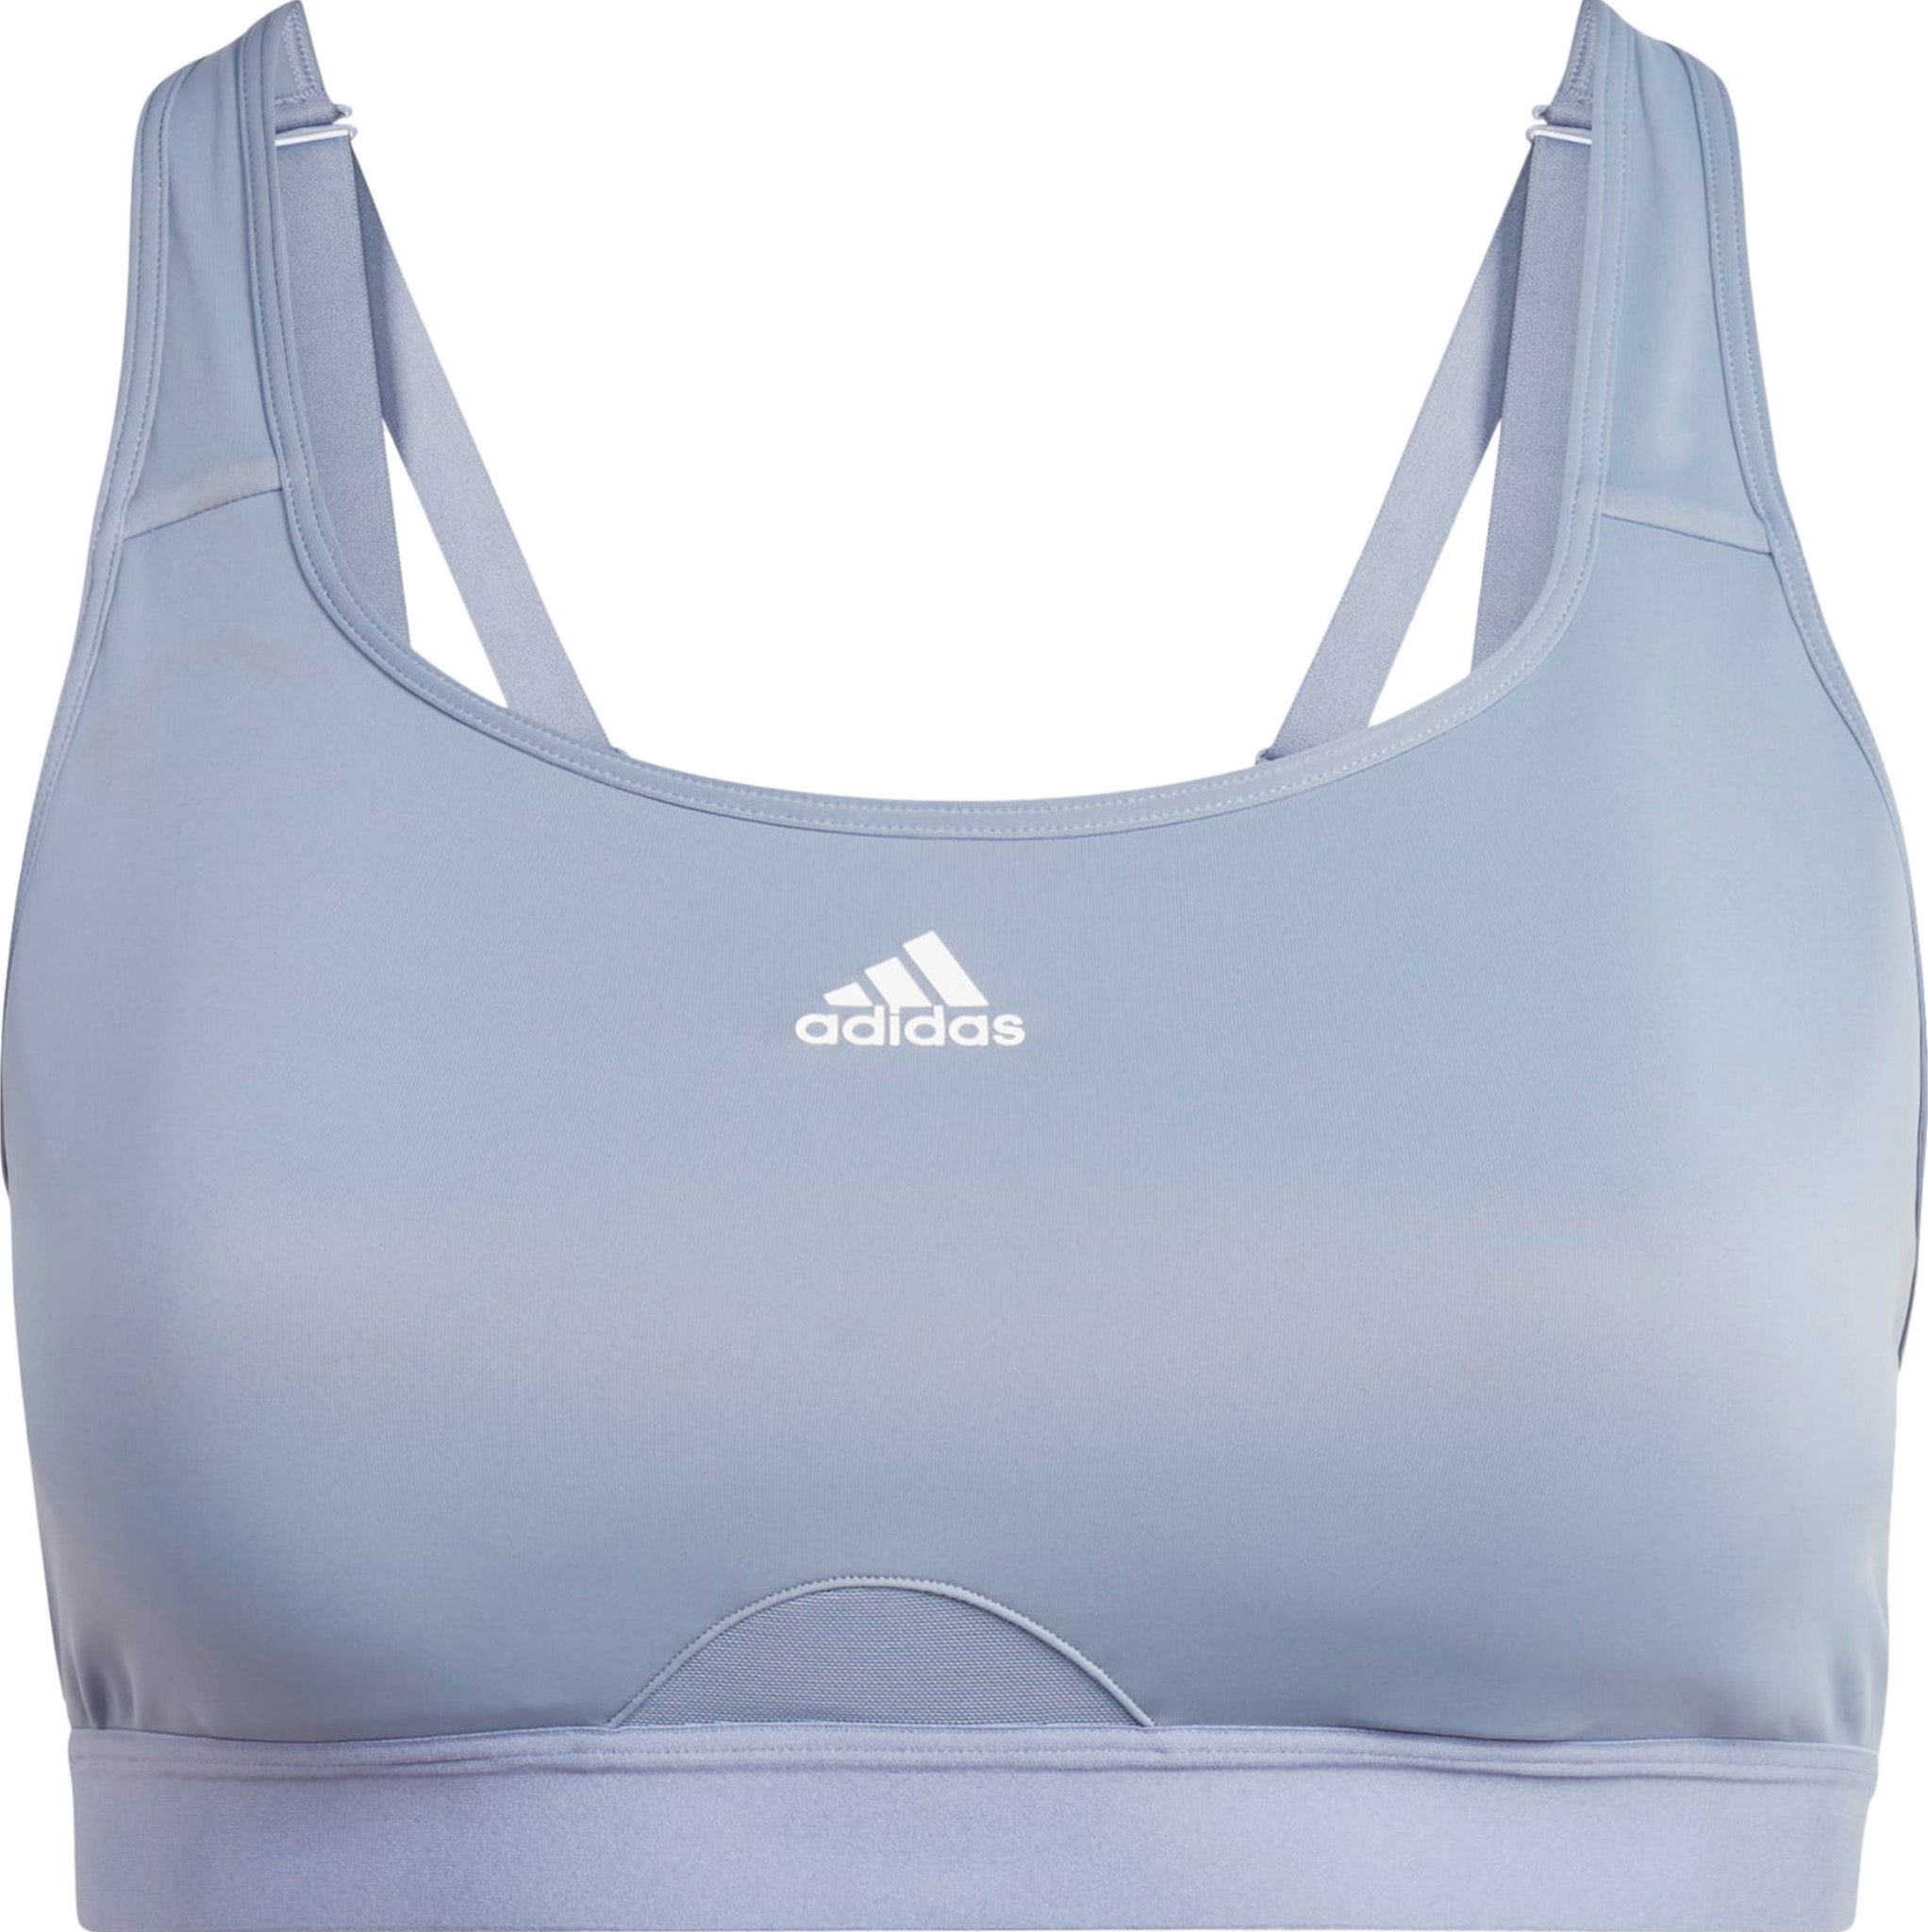 Adidas TLRD Move Training High-Support Bra (Plus Size) - Women's